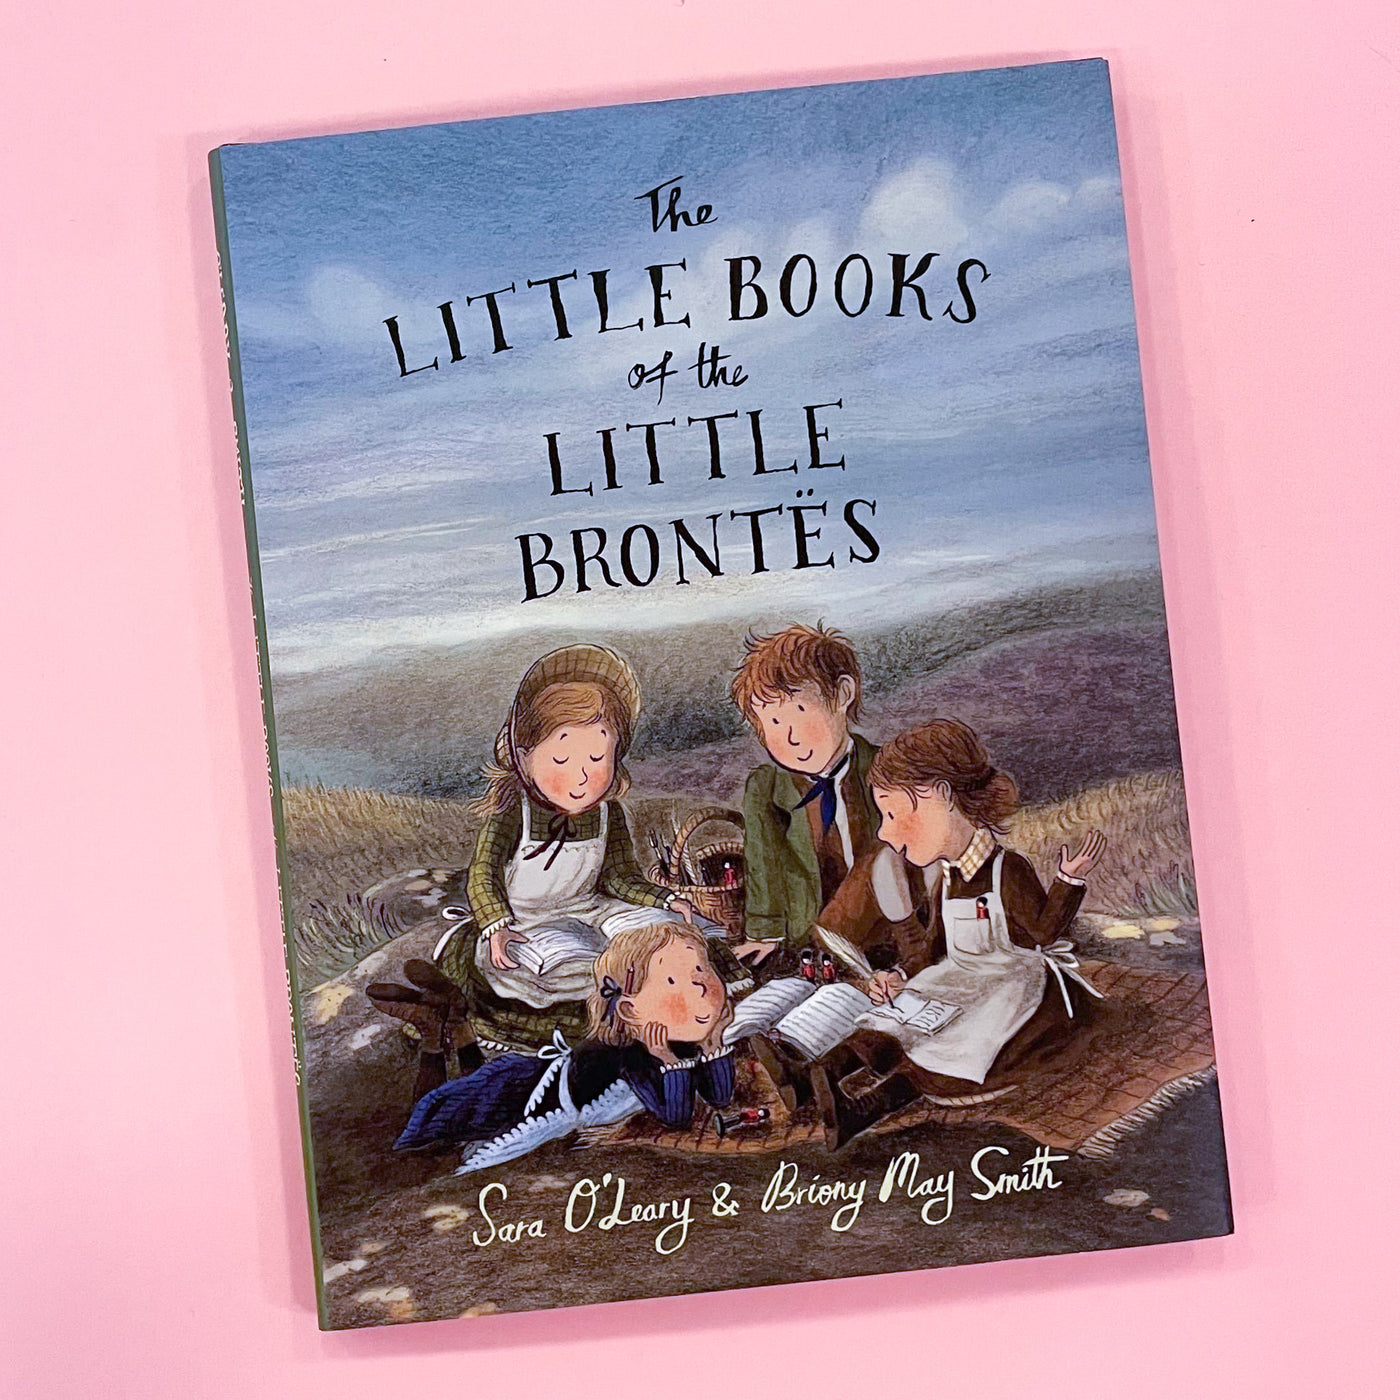 The Little Books of the Little Brontës by Sara O'Leary and Briony May Smith